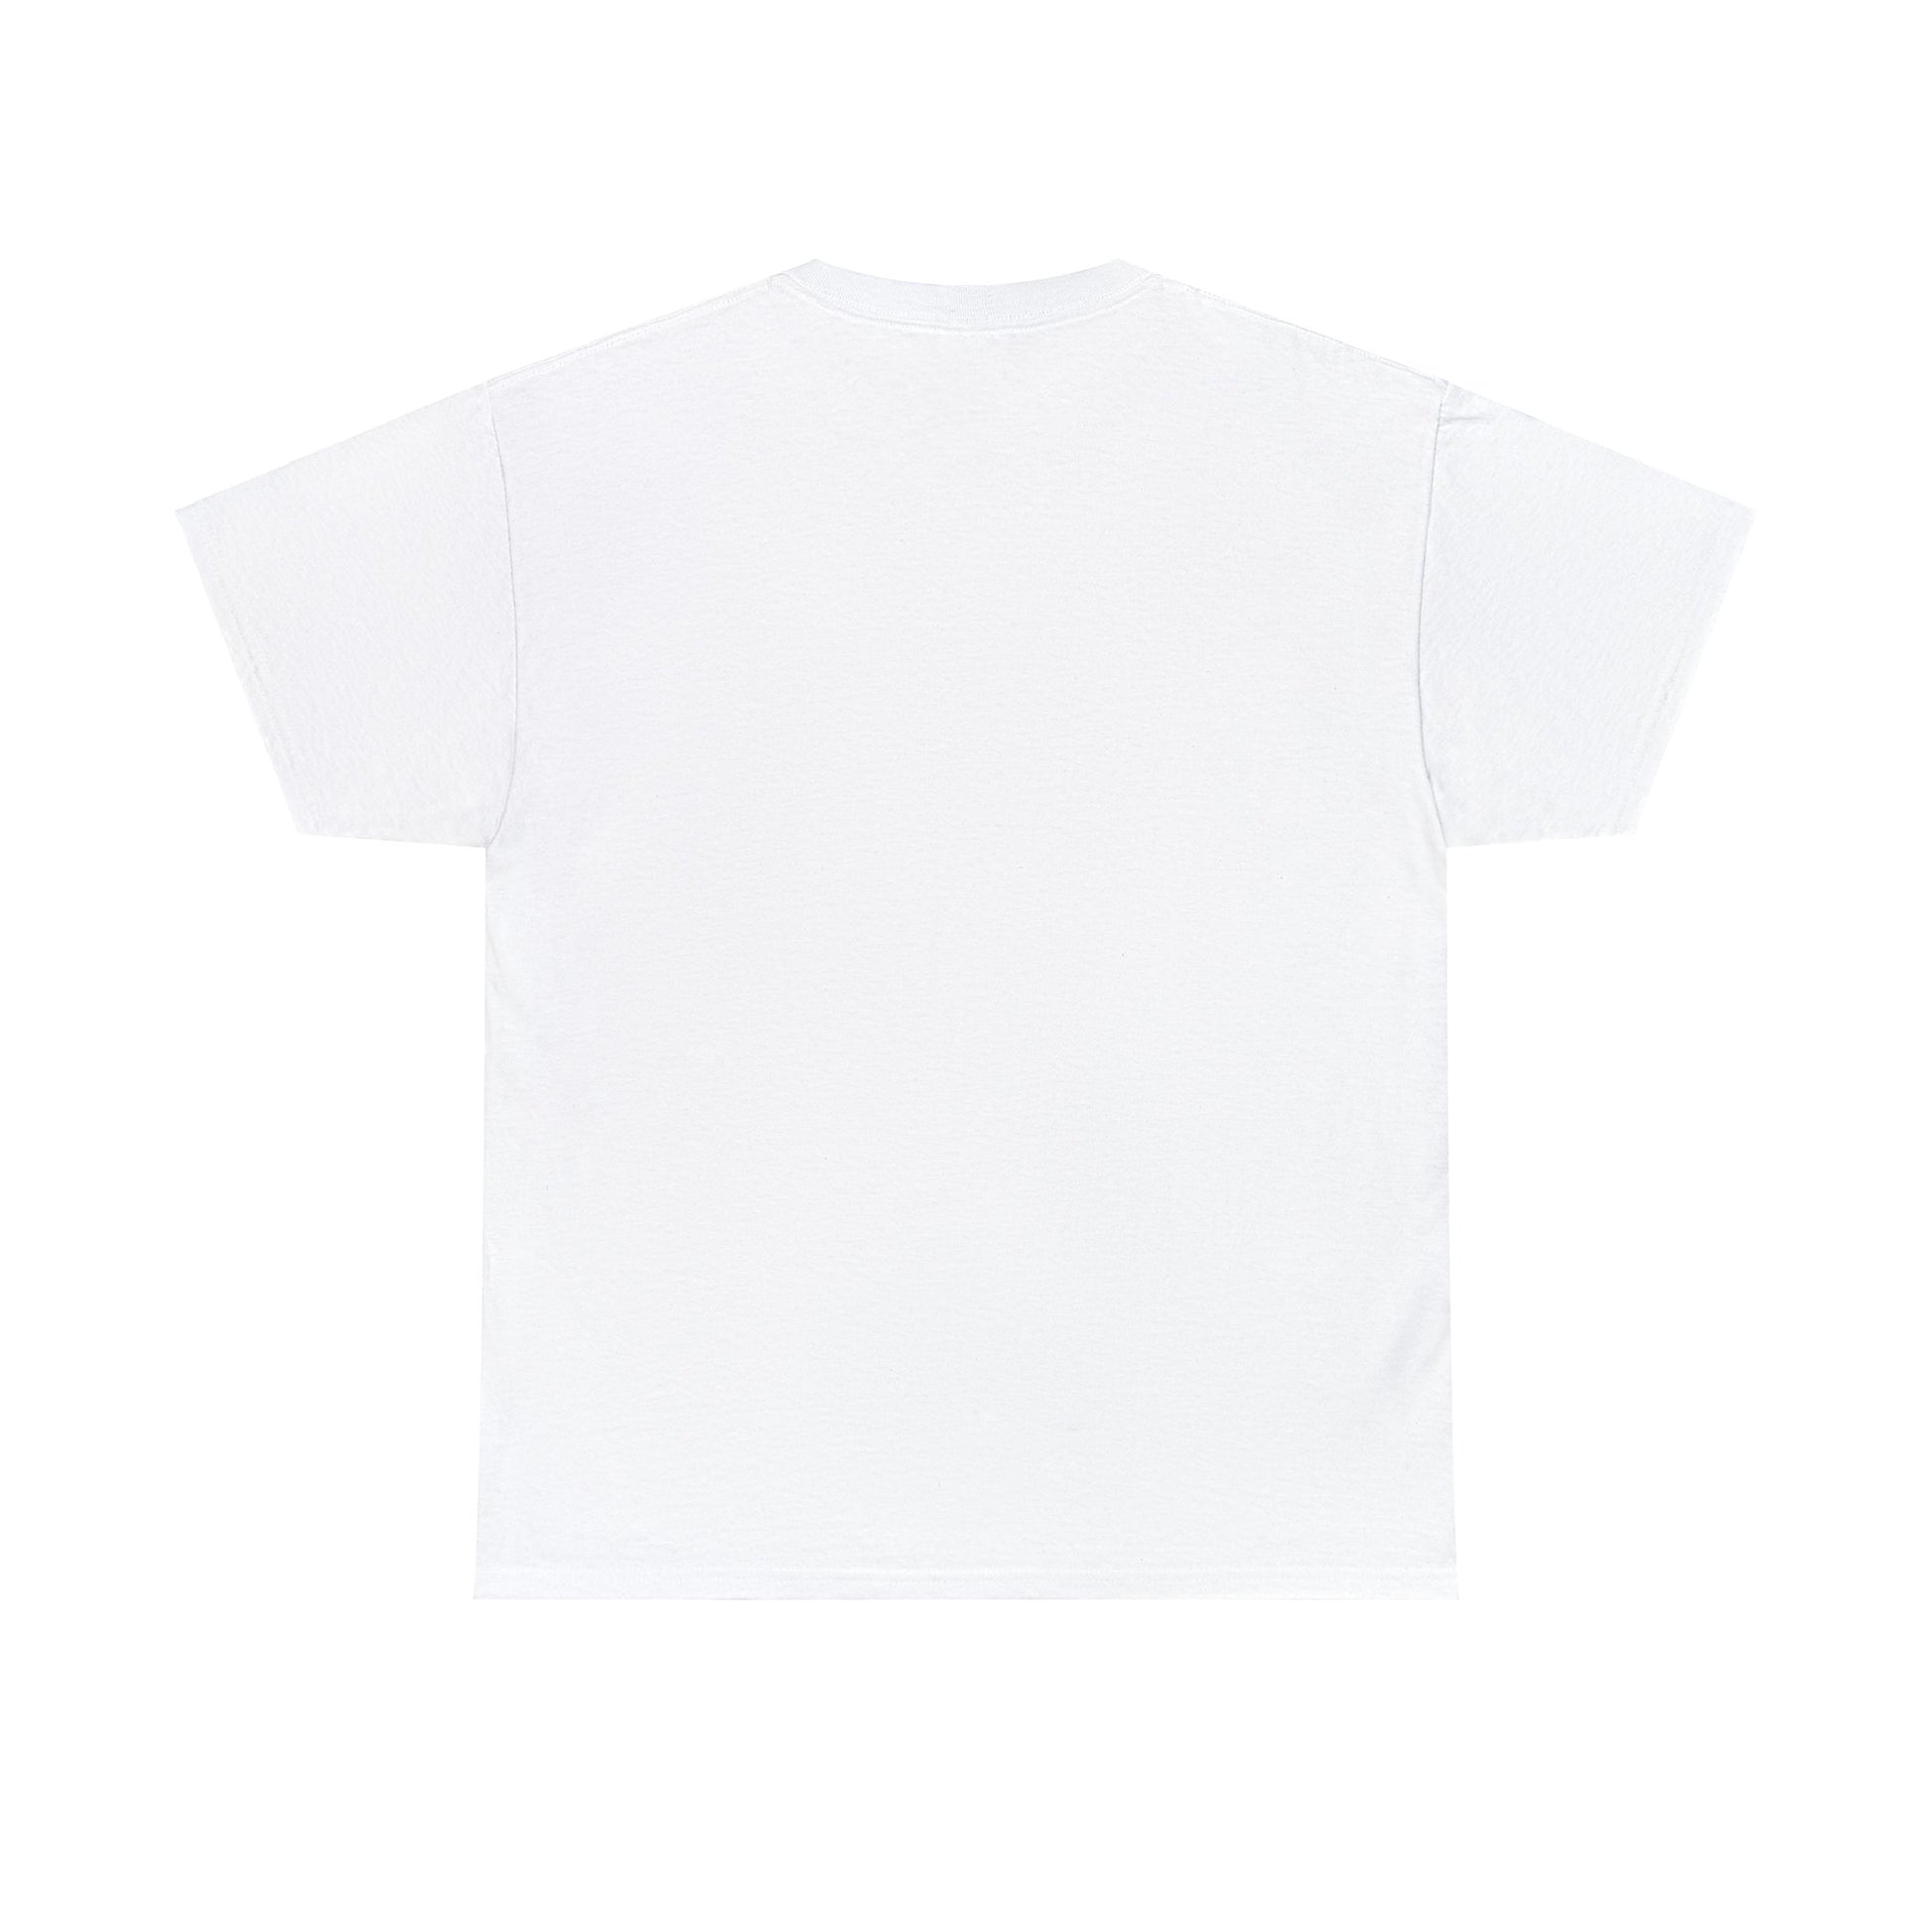 White Graphic Tees | Heavy Cotton Tees | Japanese Anime World